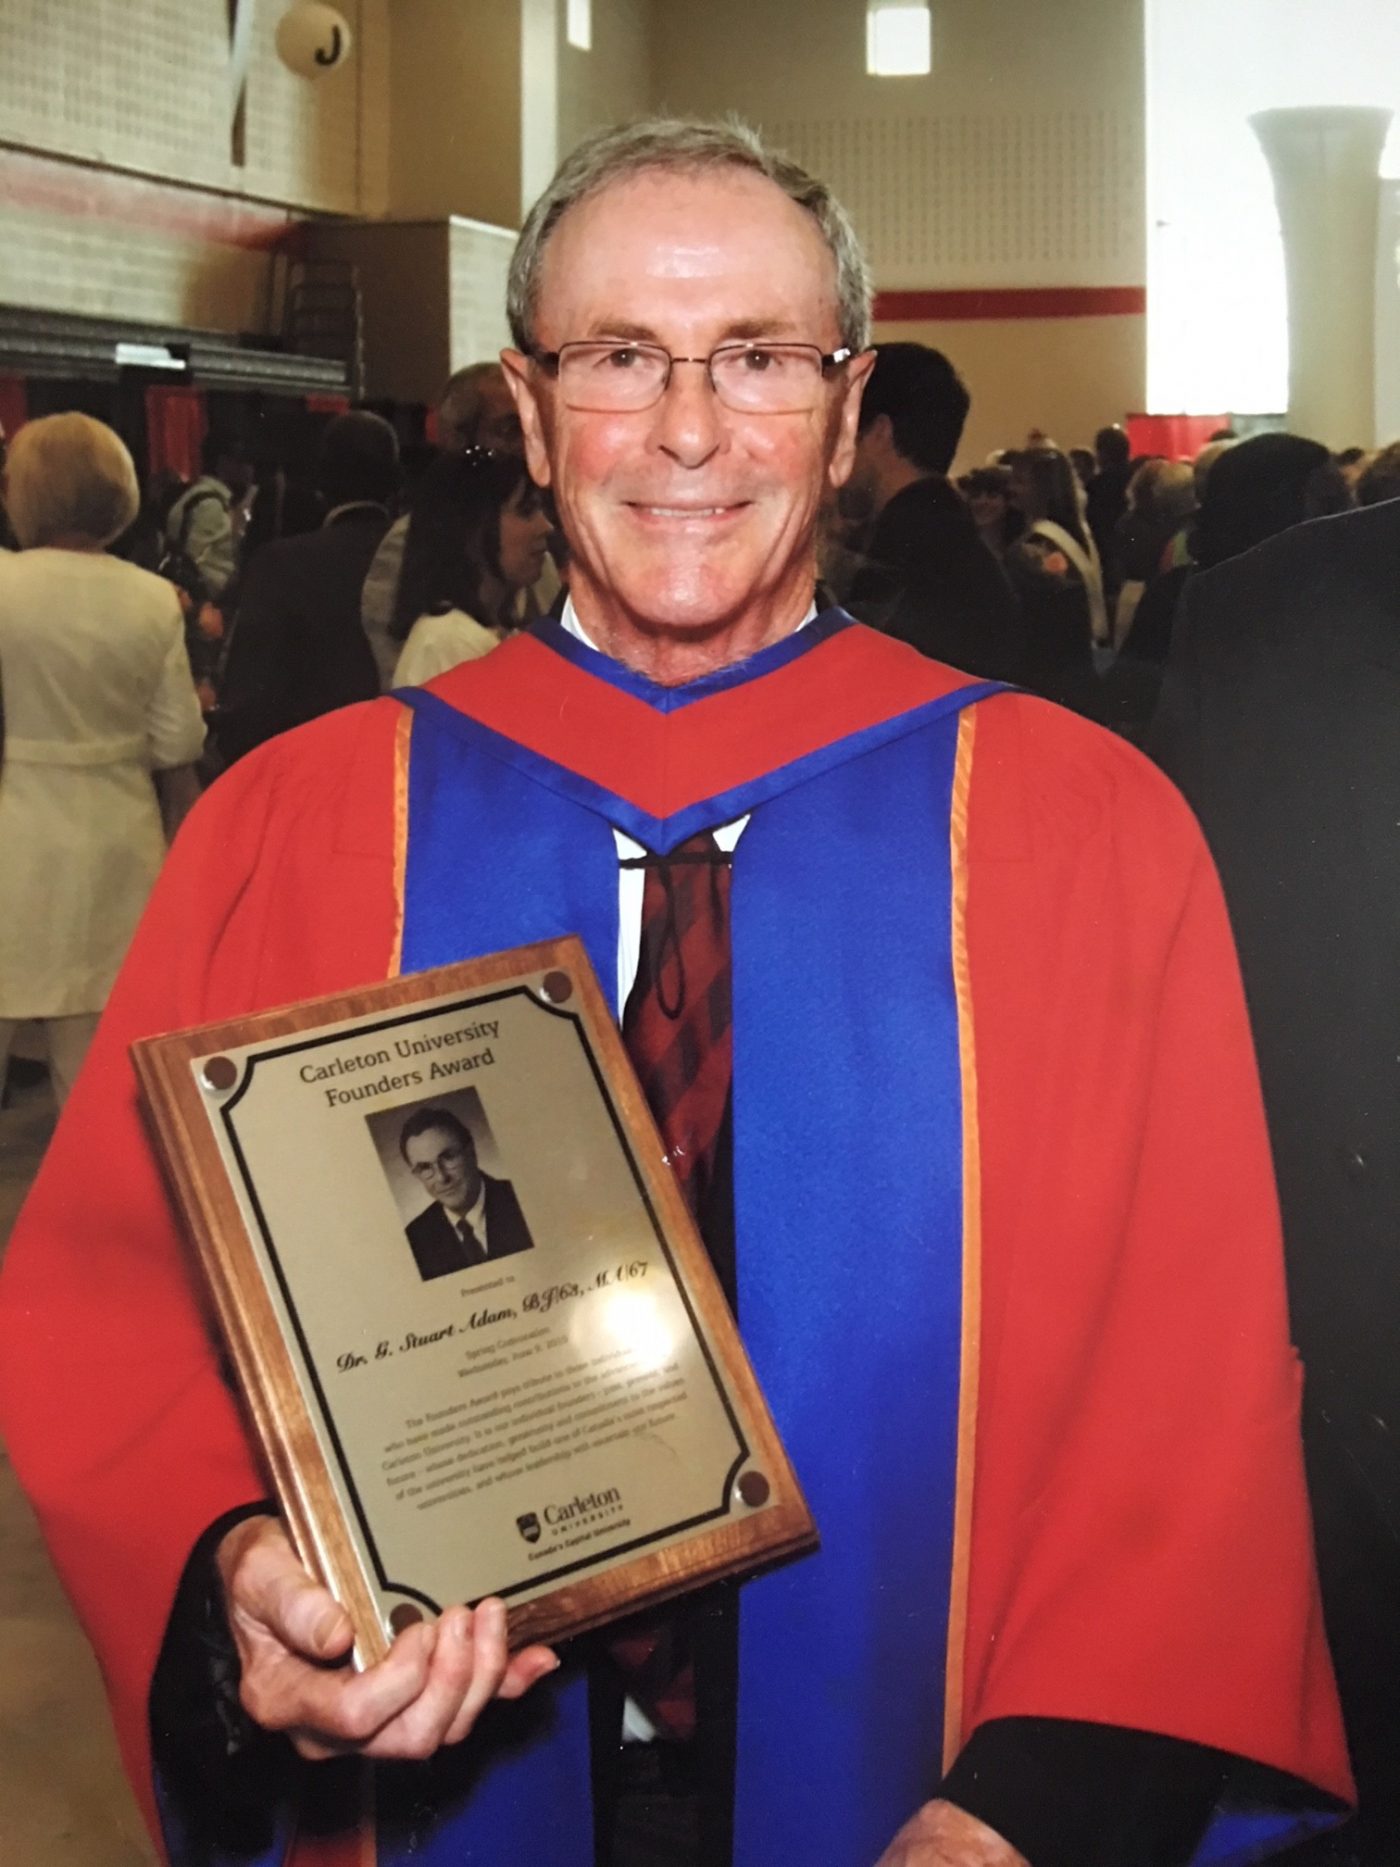 G. Stuart Adam poses in his academic gown after winning the Carleton University Founders Award.